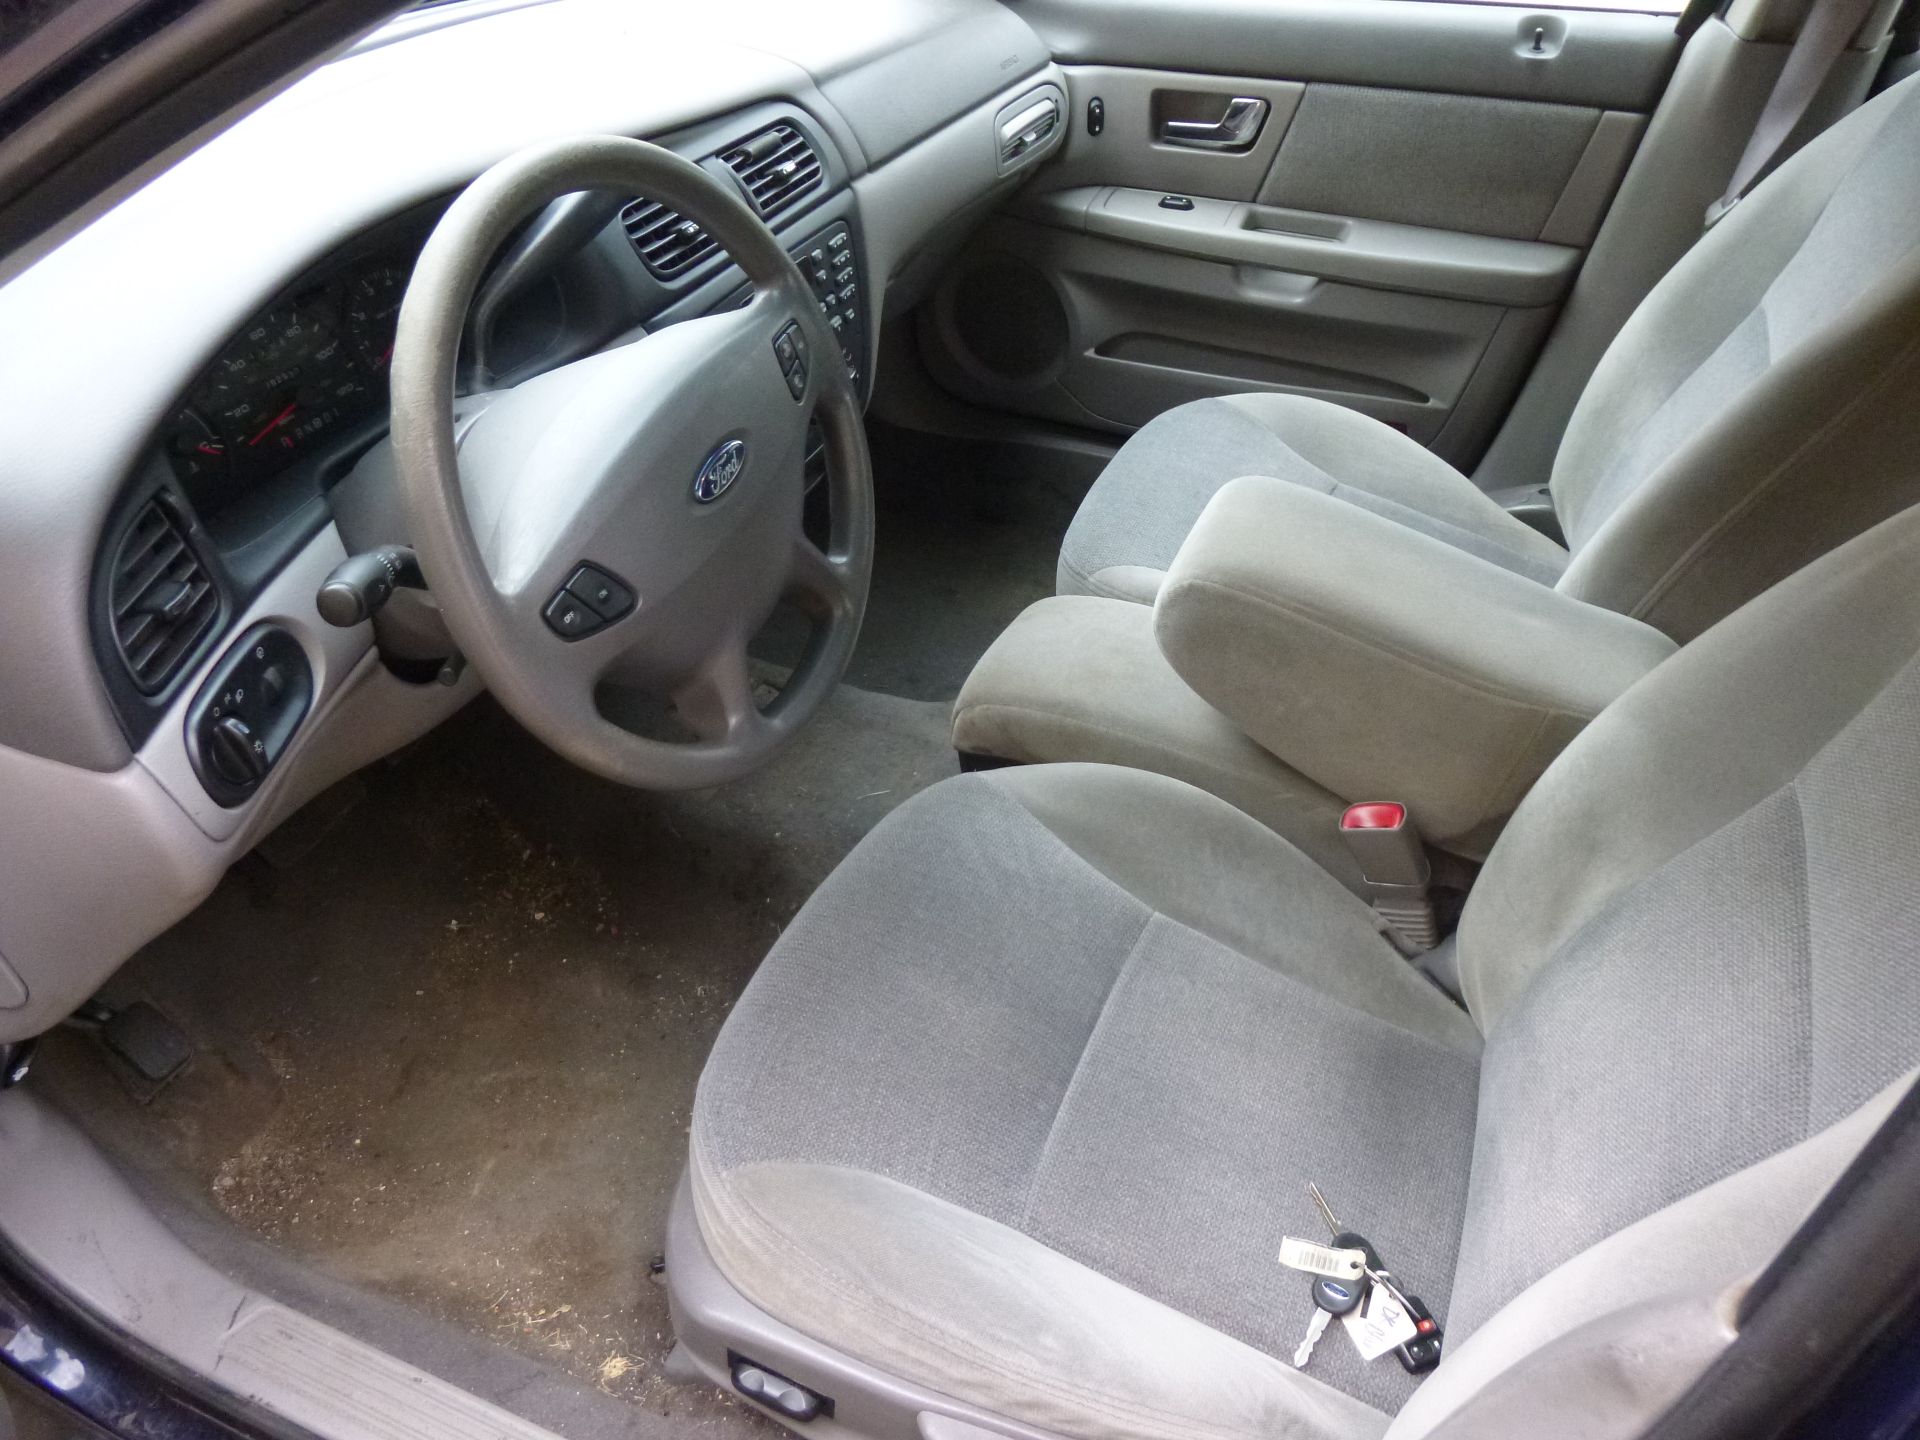 2002 Ford Taurus Municipally maintained Miles 92930 Vin # 1FAFP532X2G180779 CLEAR TITLE(located at - Image 5 of 12